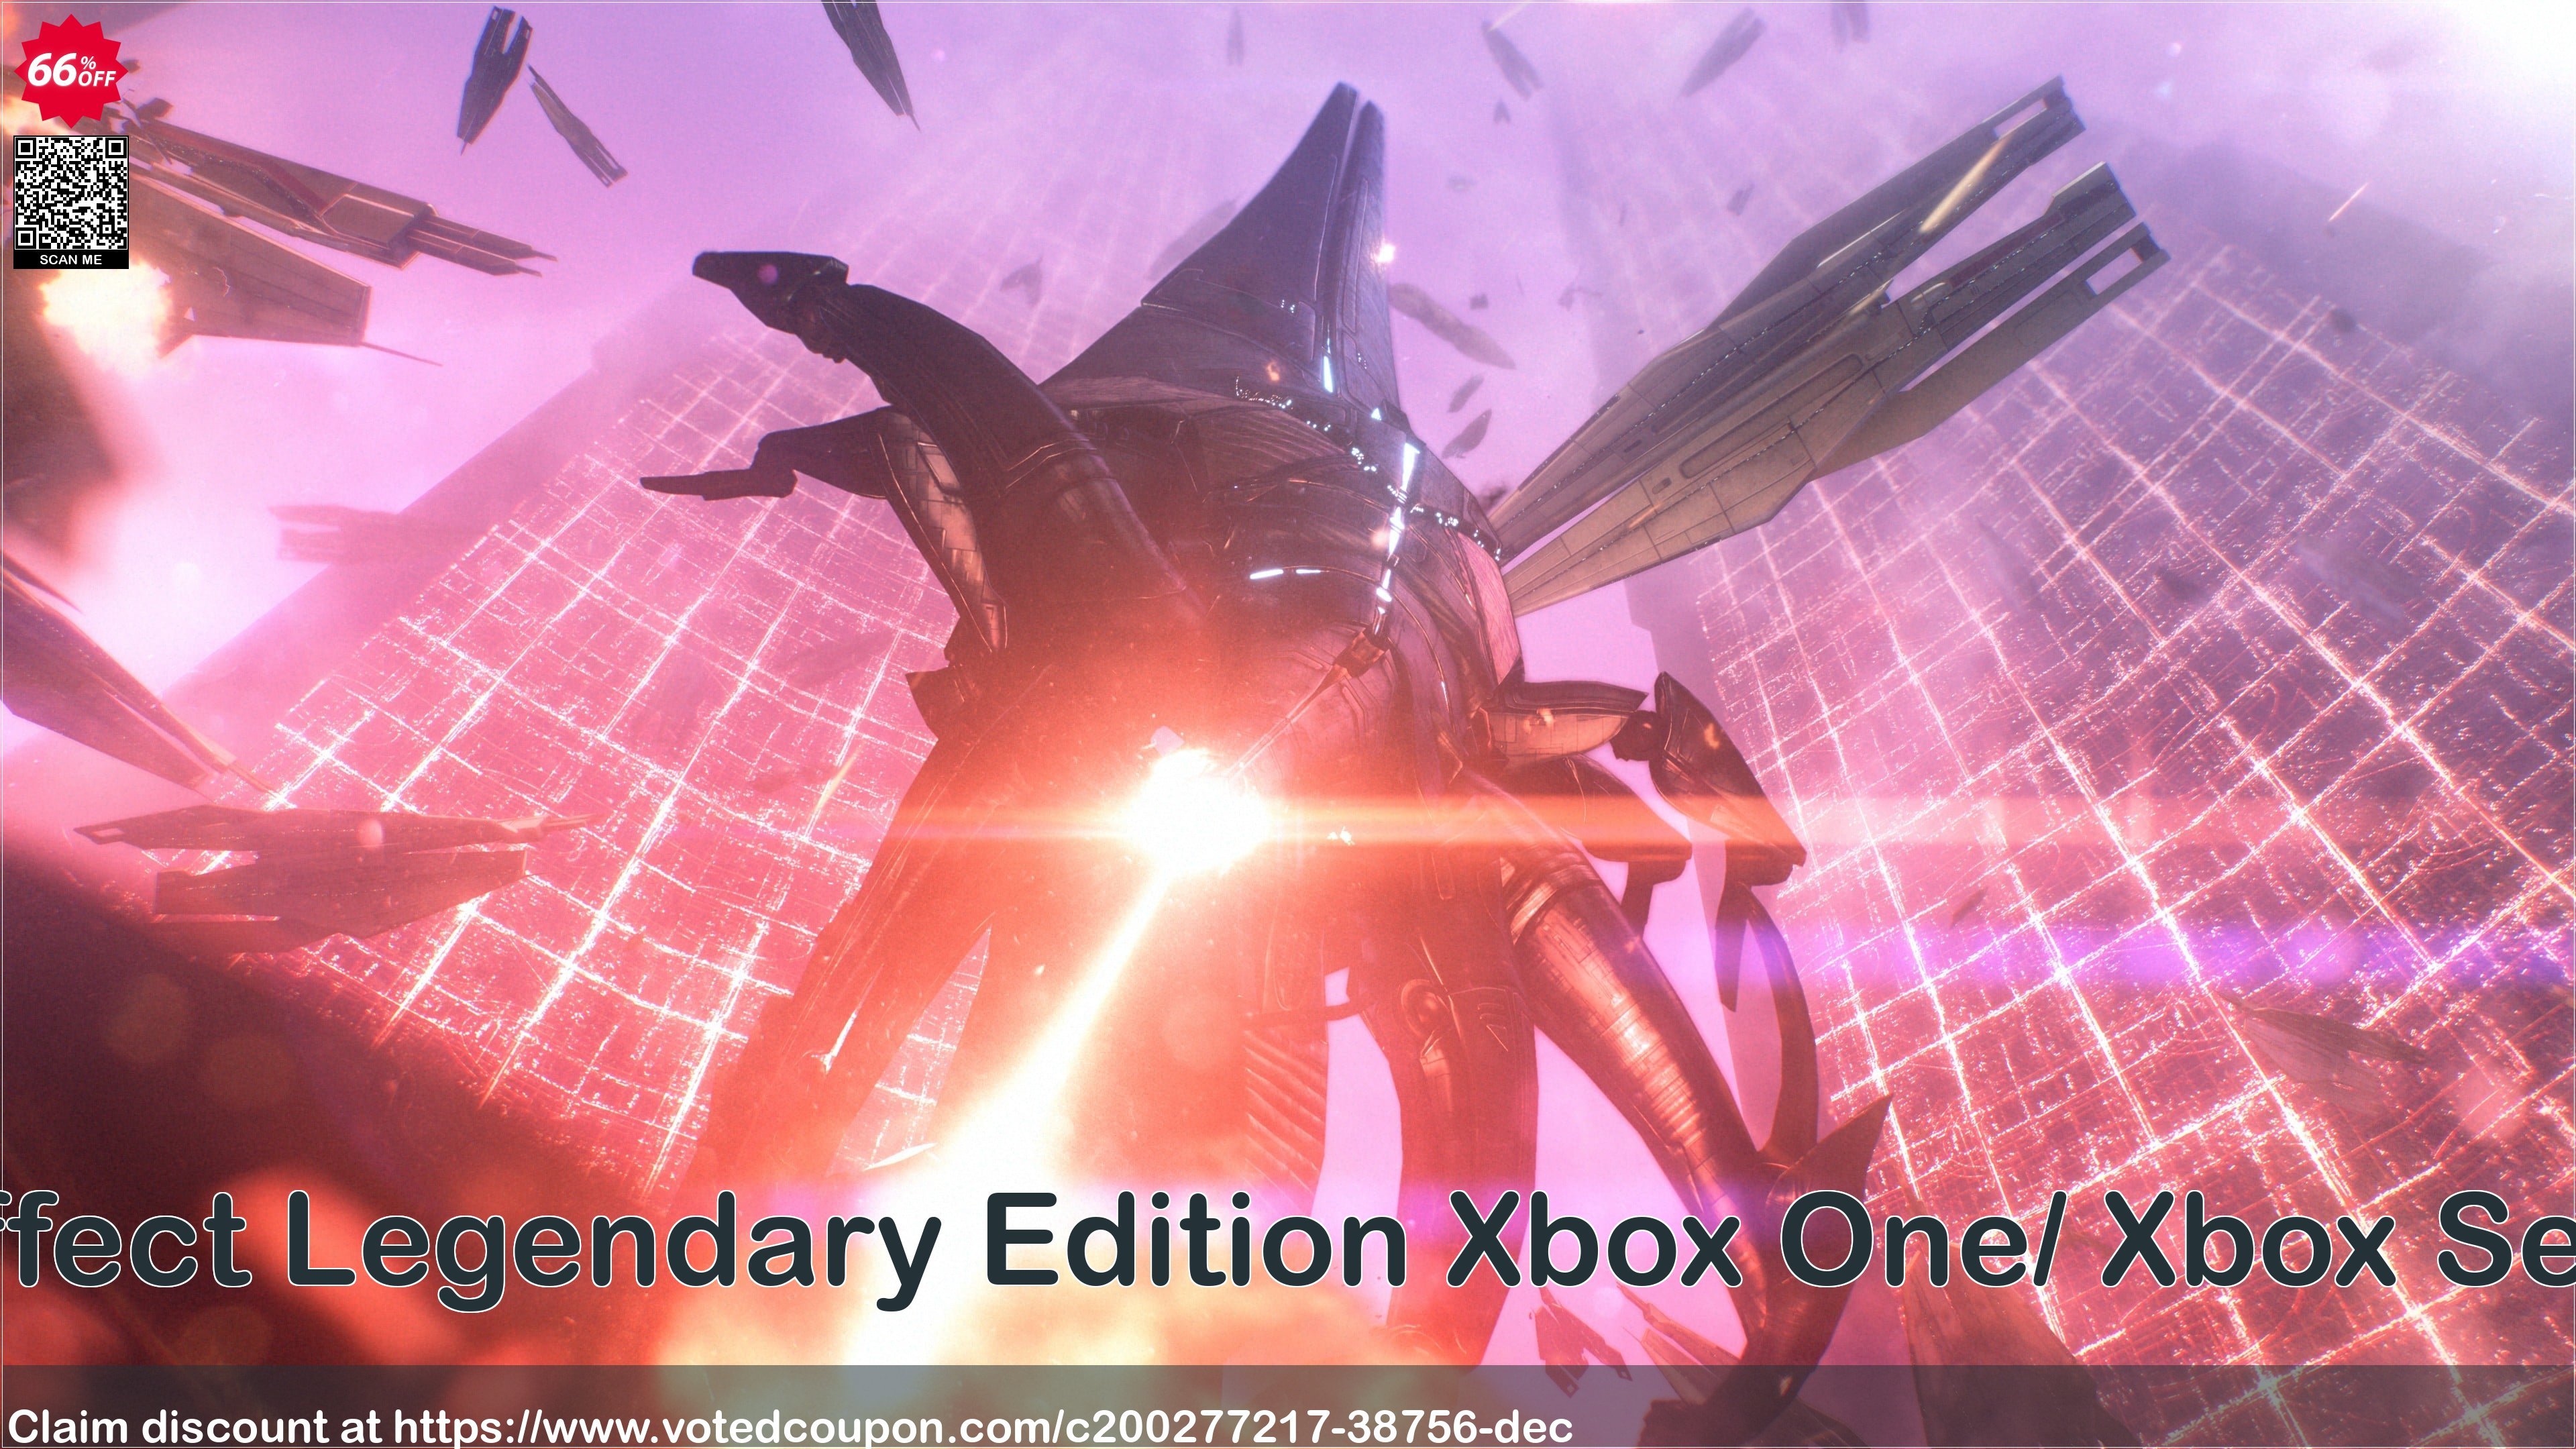 Mass Effect Legendary Edition Xbox One/ Xbox Series X|S Coupon Code Apr 2024, 66% OFF - VotedCoupon